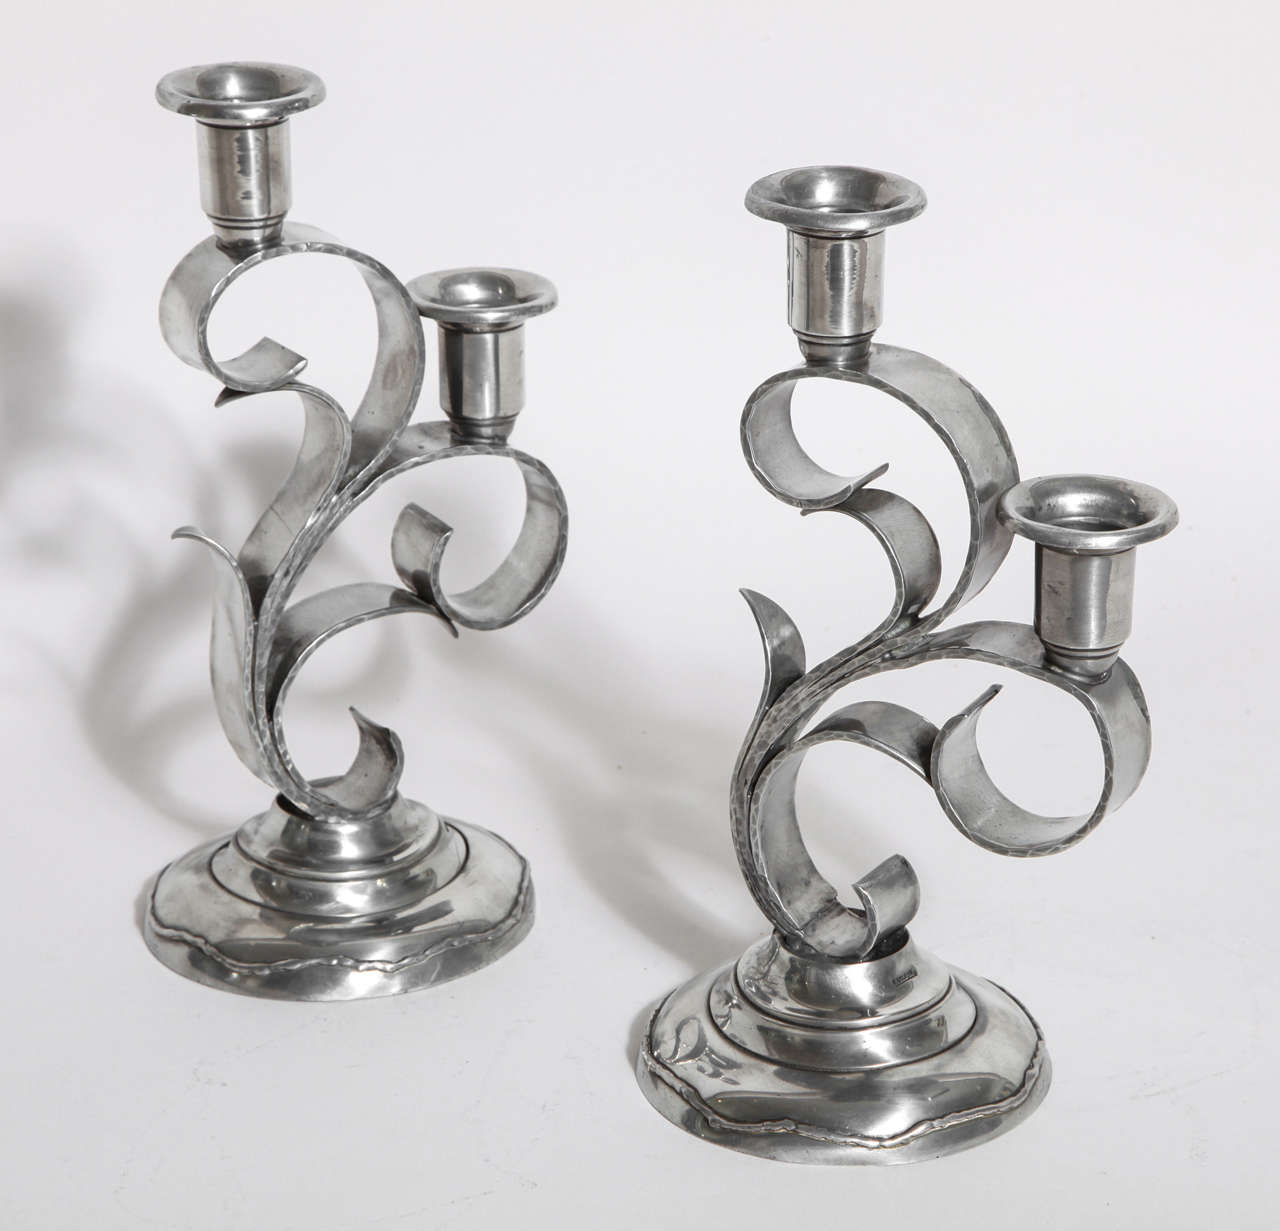 Handwrought dinanderie pewter candelabra with two nozzles on each.
Signed:  